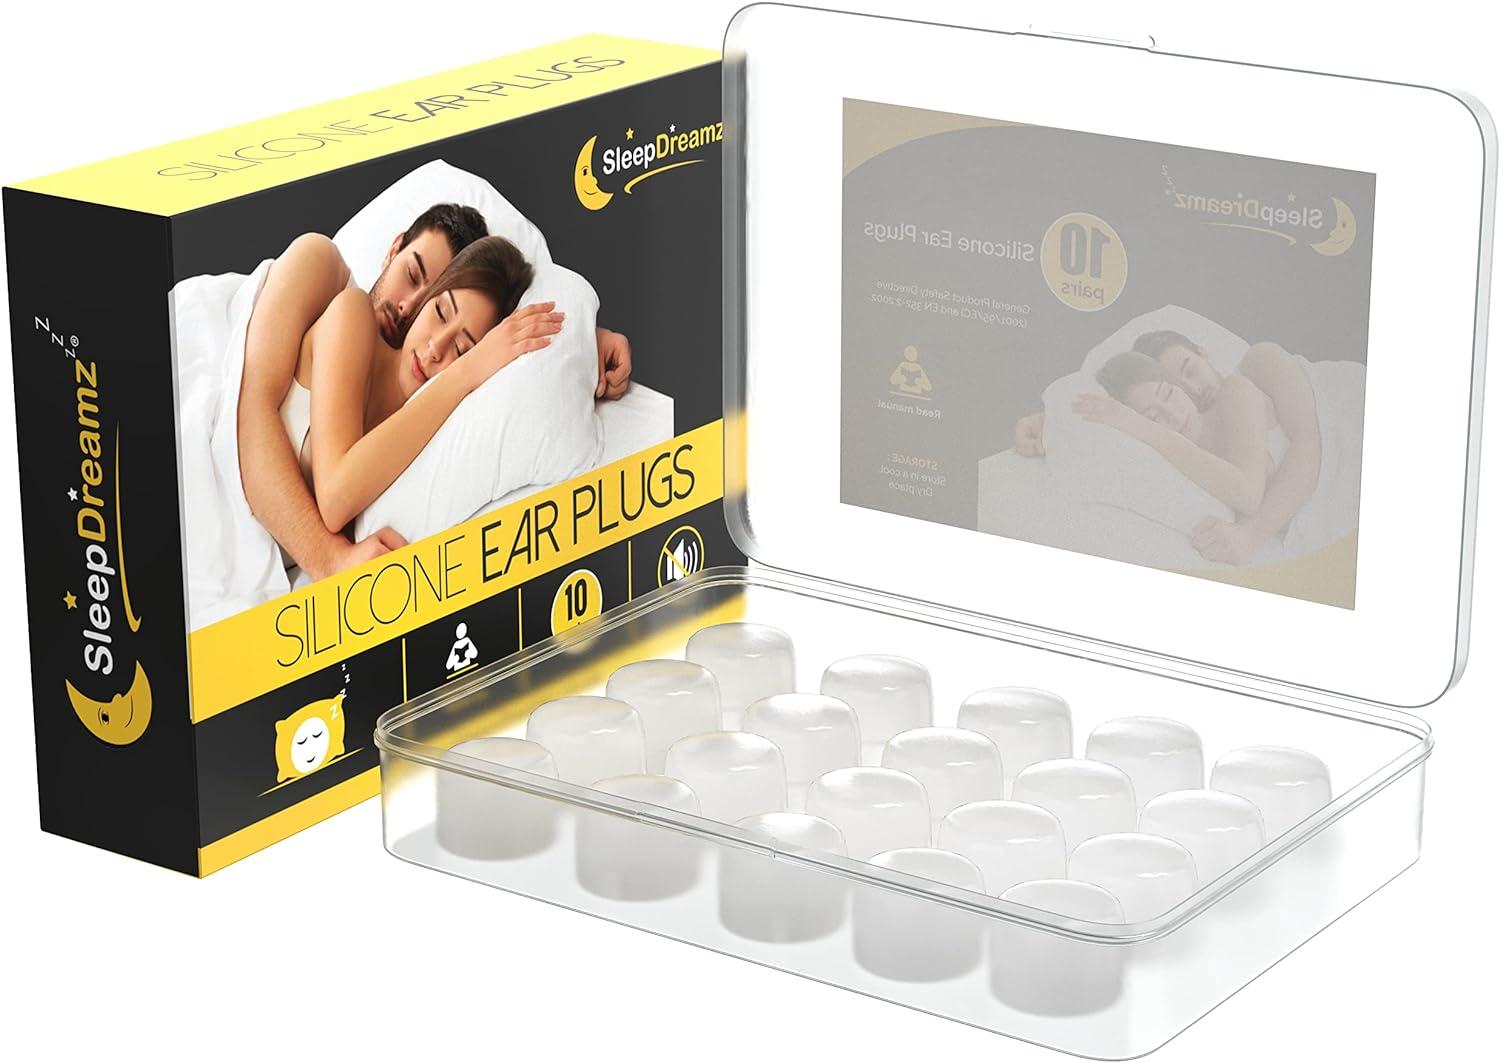 The 7 Best Earplugs for Uninterrupted Sleep, Based on Our Testing